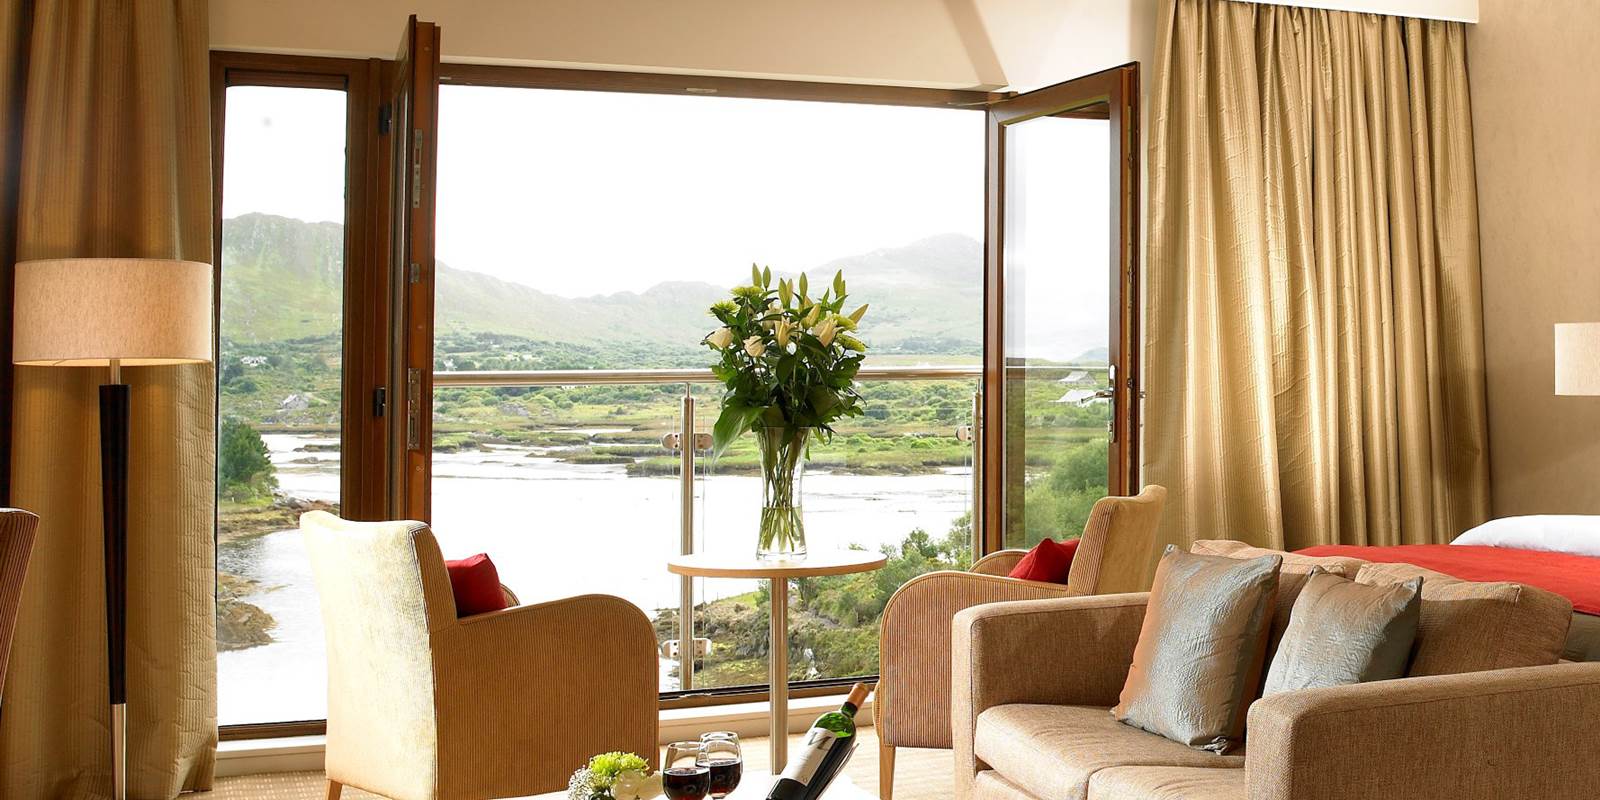 Sneem Hotel in Kerry with sea views 𝗙𝗿𝗼𝗺 €𝟭𝟭𝟬 𝗽𝗲𝗿 𝗿𝗼𝗼𝗺 